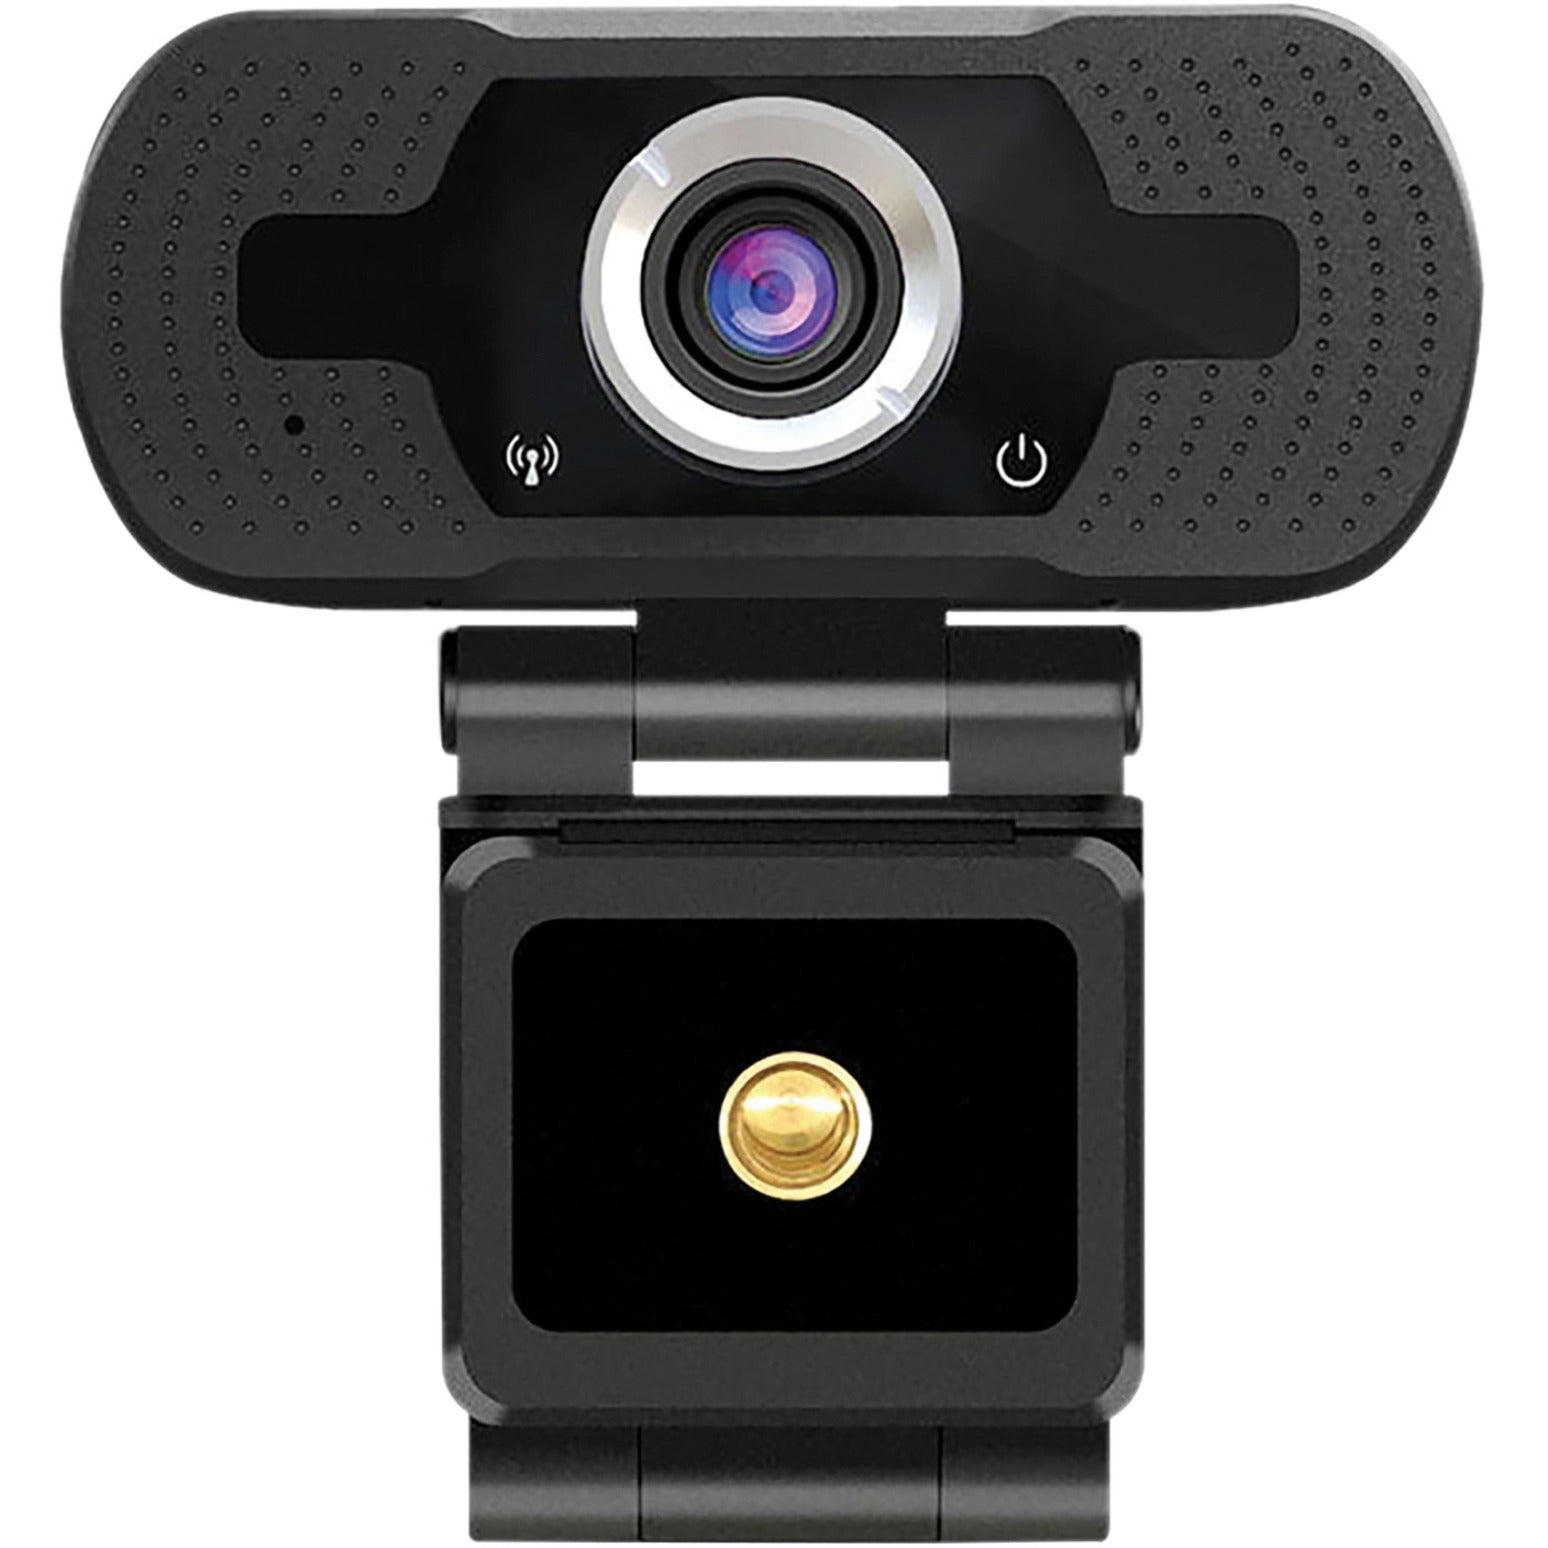 Urban Factory WHD20UF WEBEE 1080p Full HD USB Webcam with Autofocus, 2MP, USB 3.0, Built-in Microphone